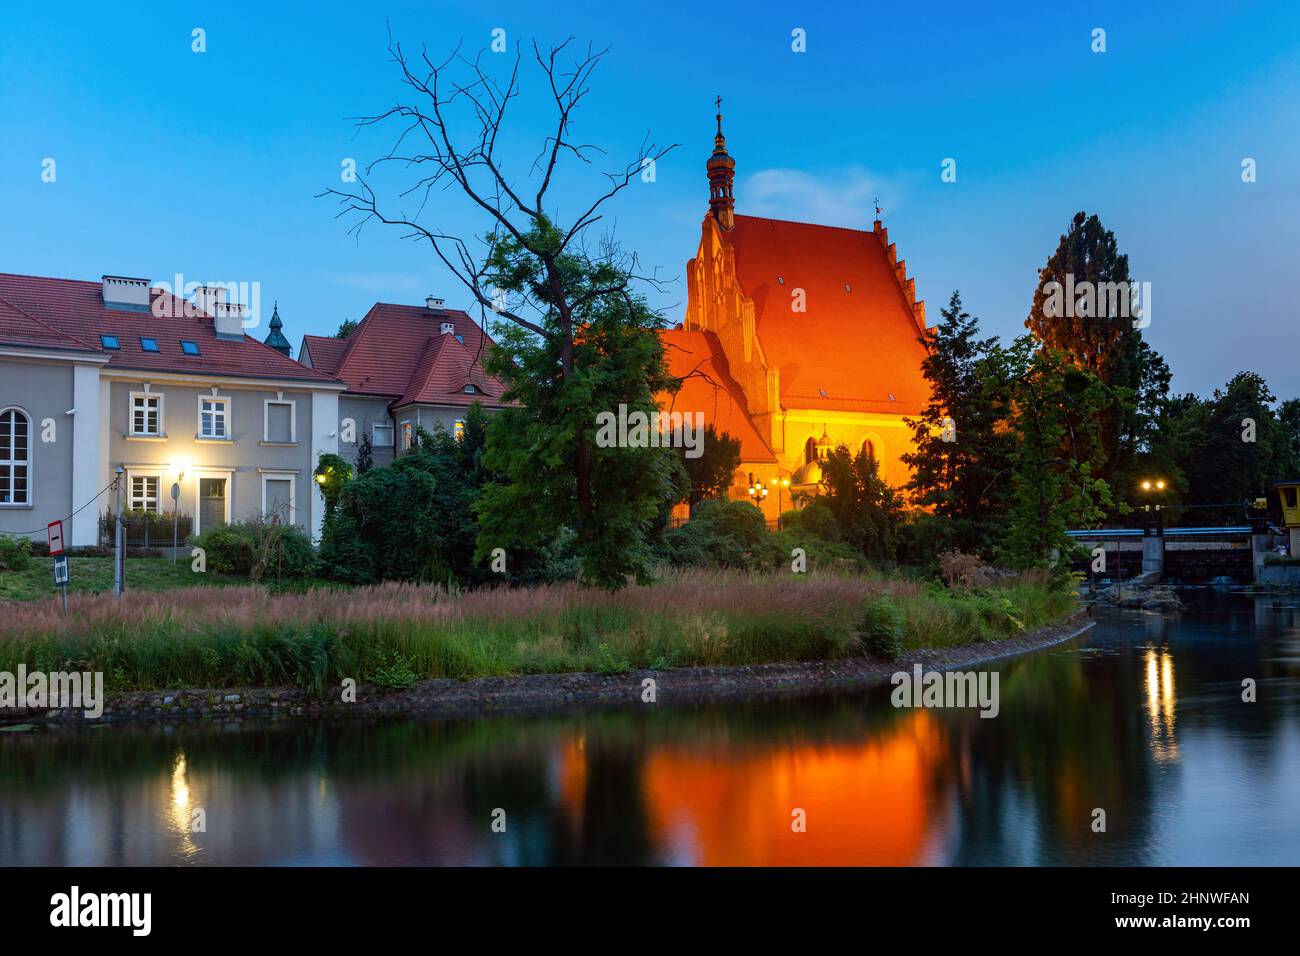 Panorama of Brick Gothic Bydgoszcz Cathedral with reflection in Brda River at night, Bydgoszcz, Poland Stock Photo